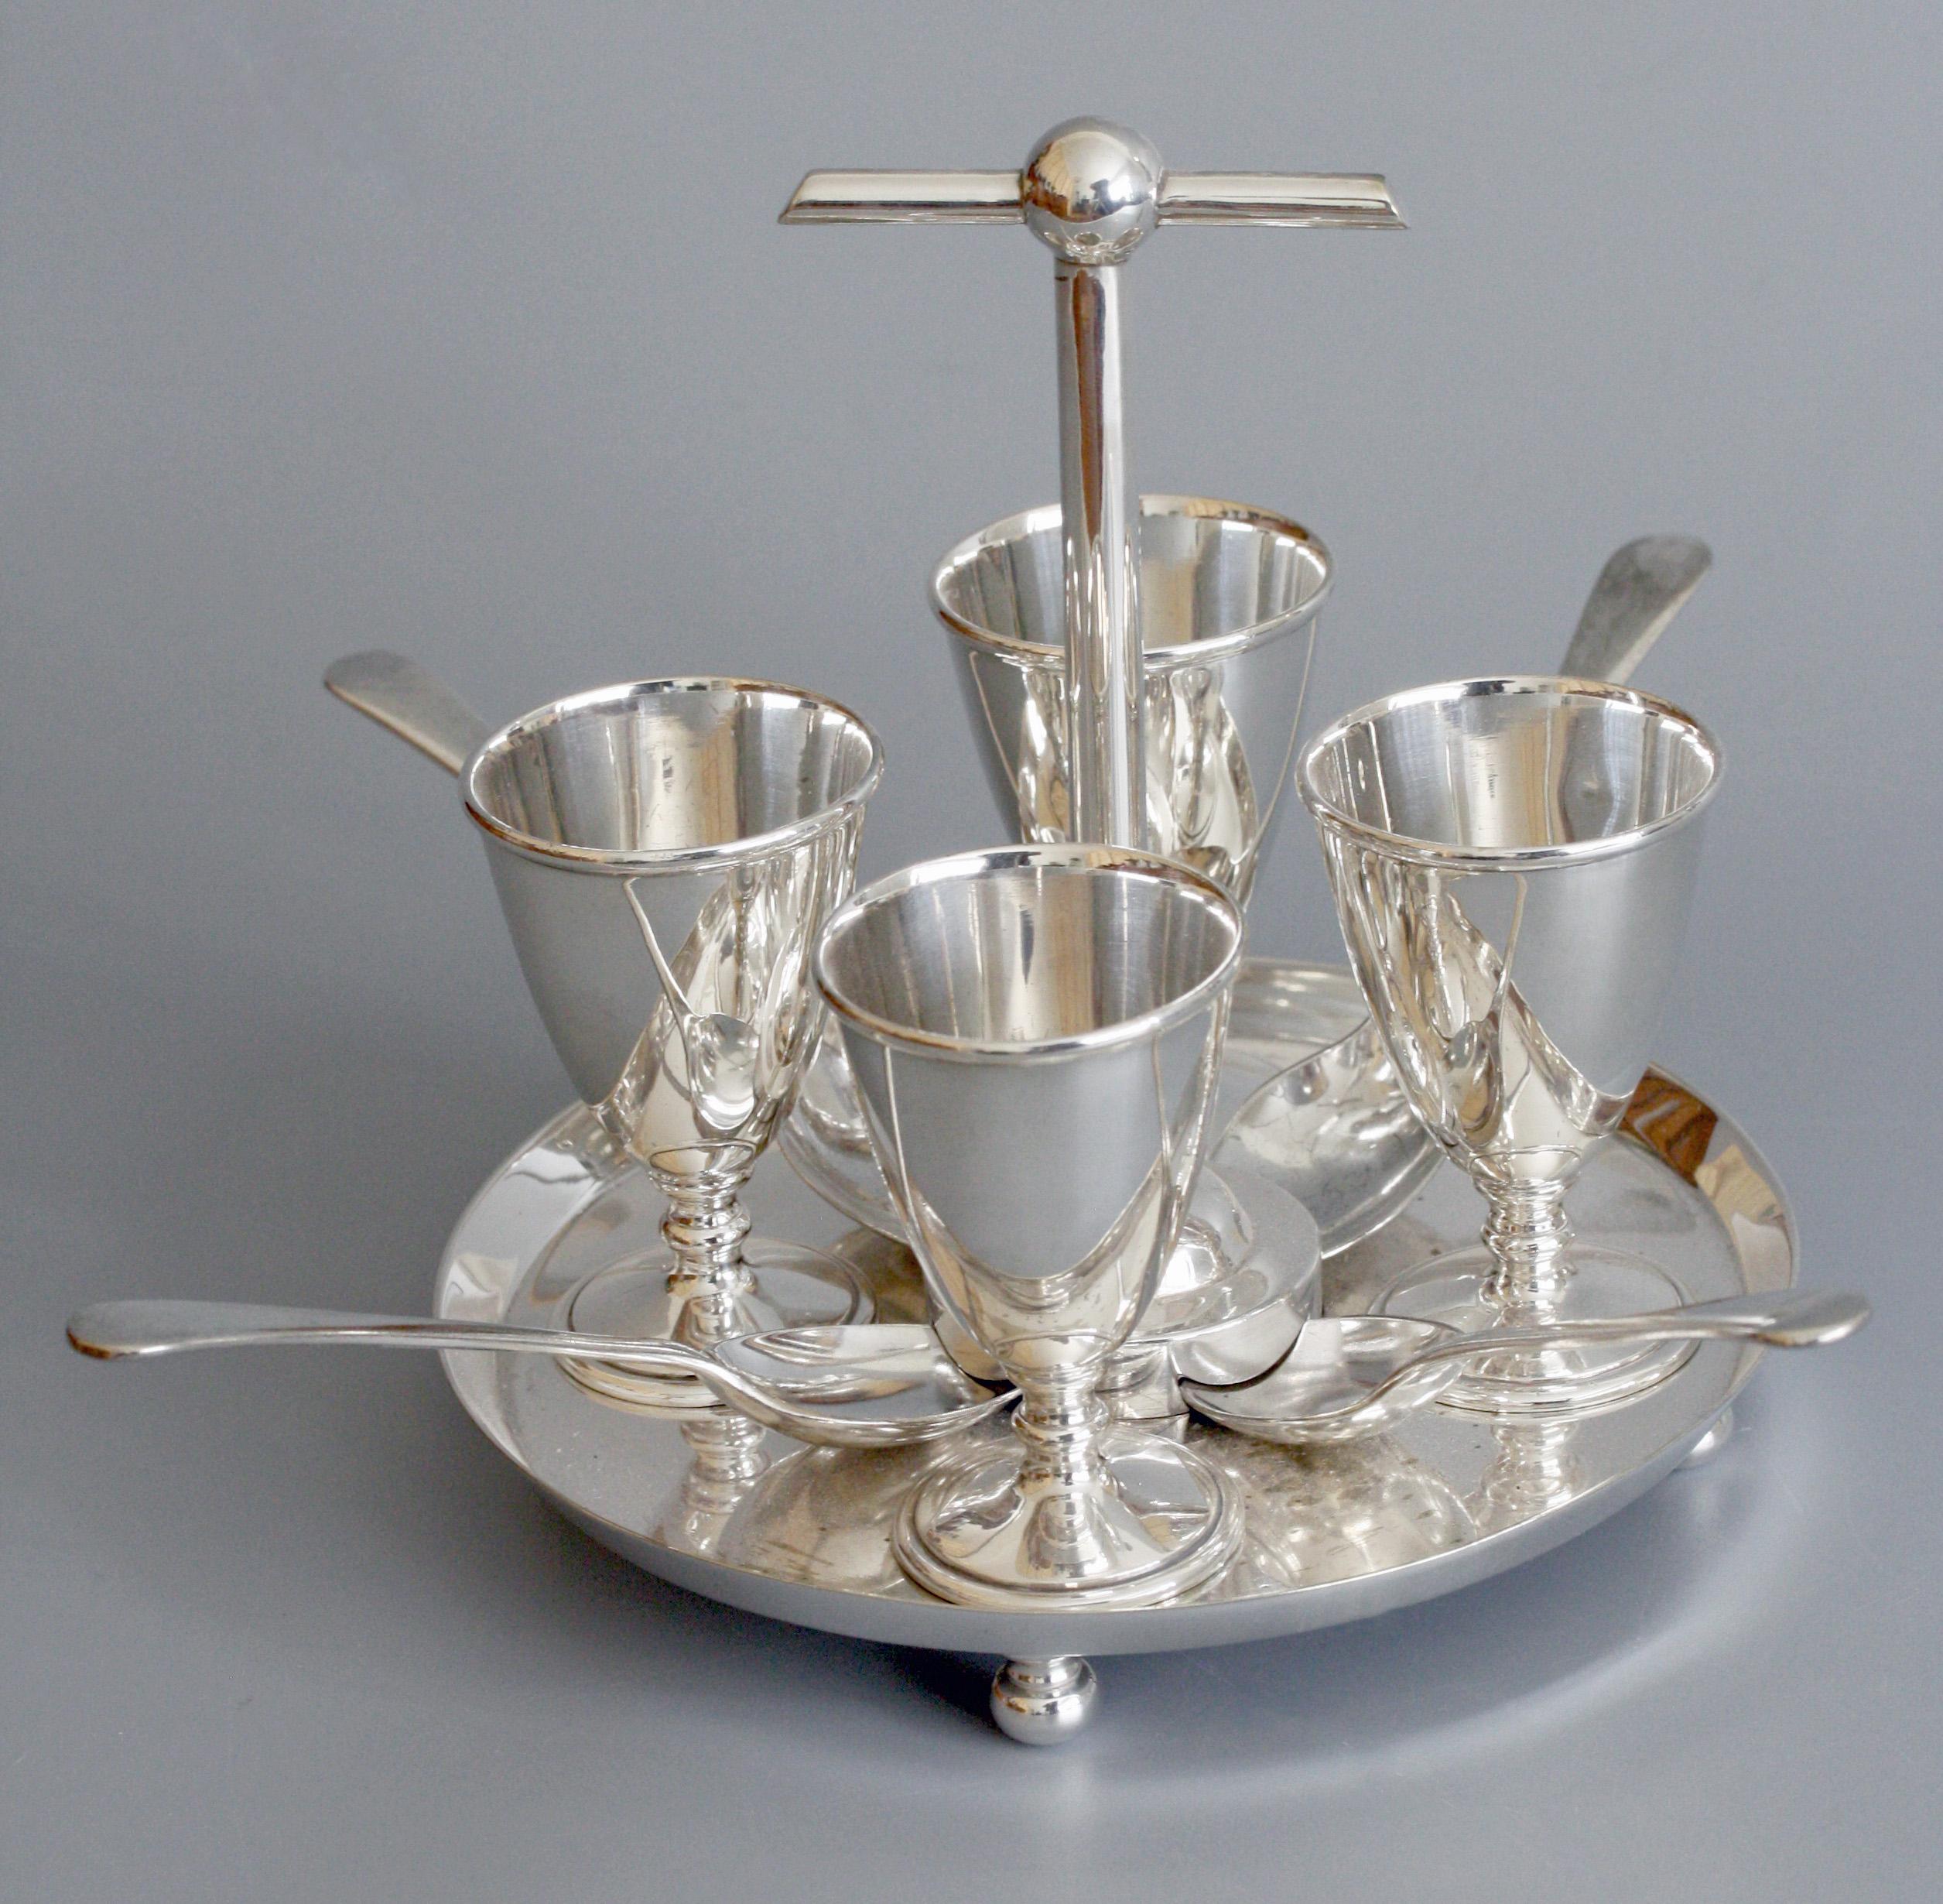 Hukin & Heath Silver Plated Four Eggcup Stand Designed by Christopher Dresser 6